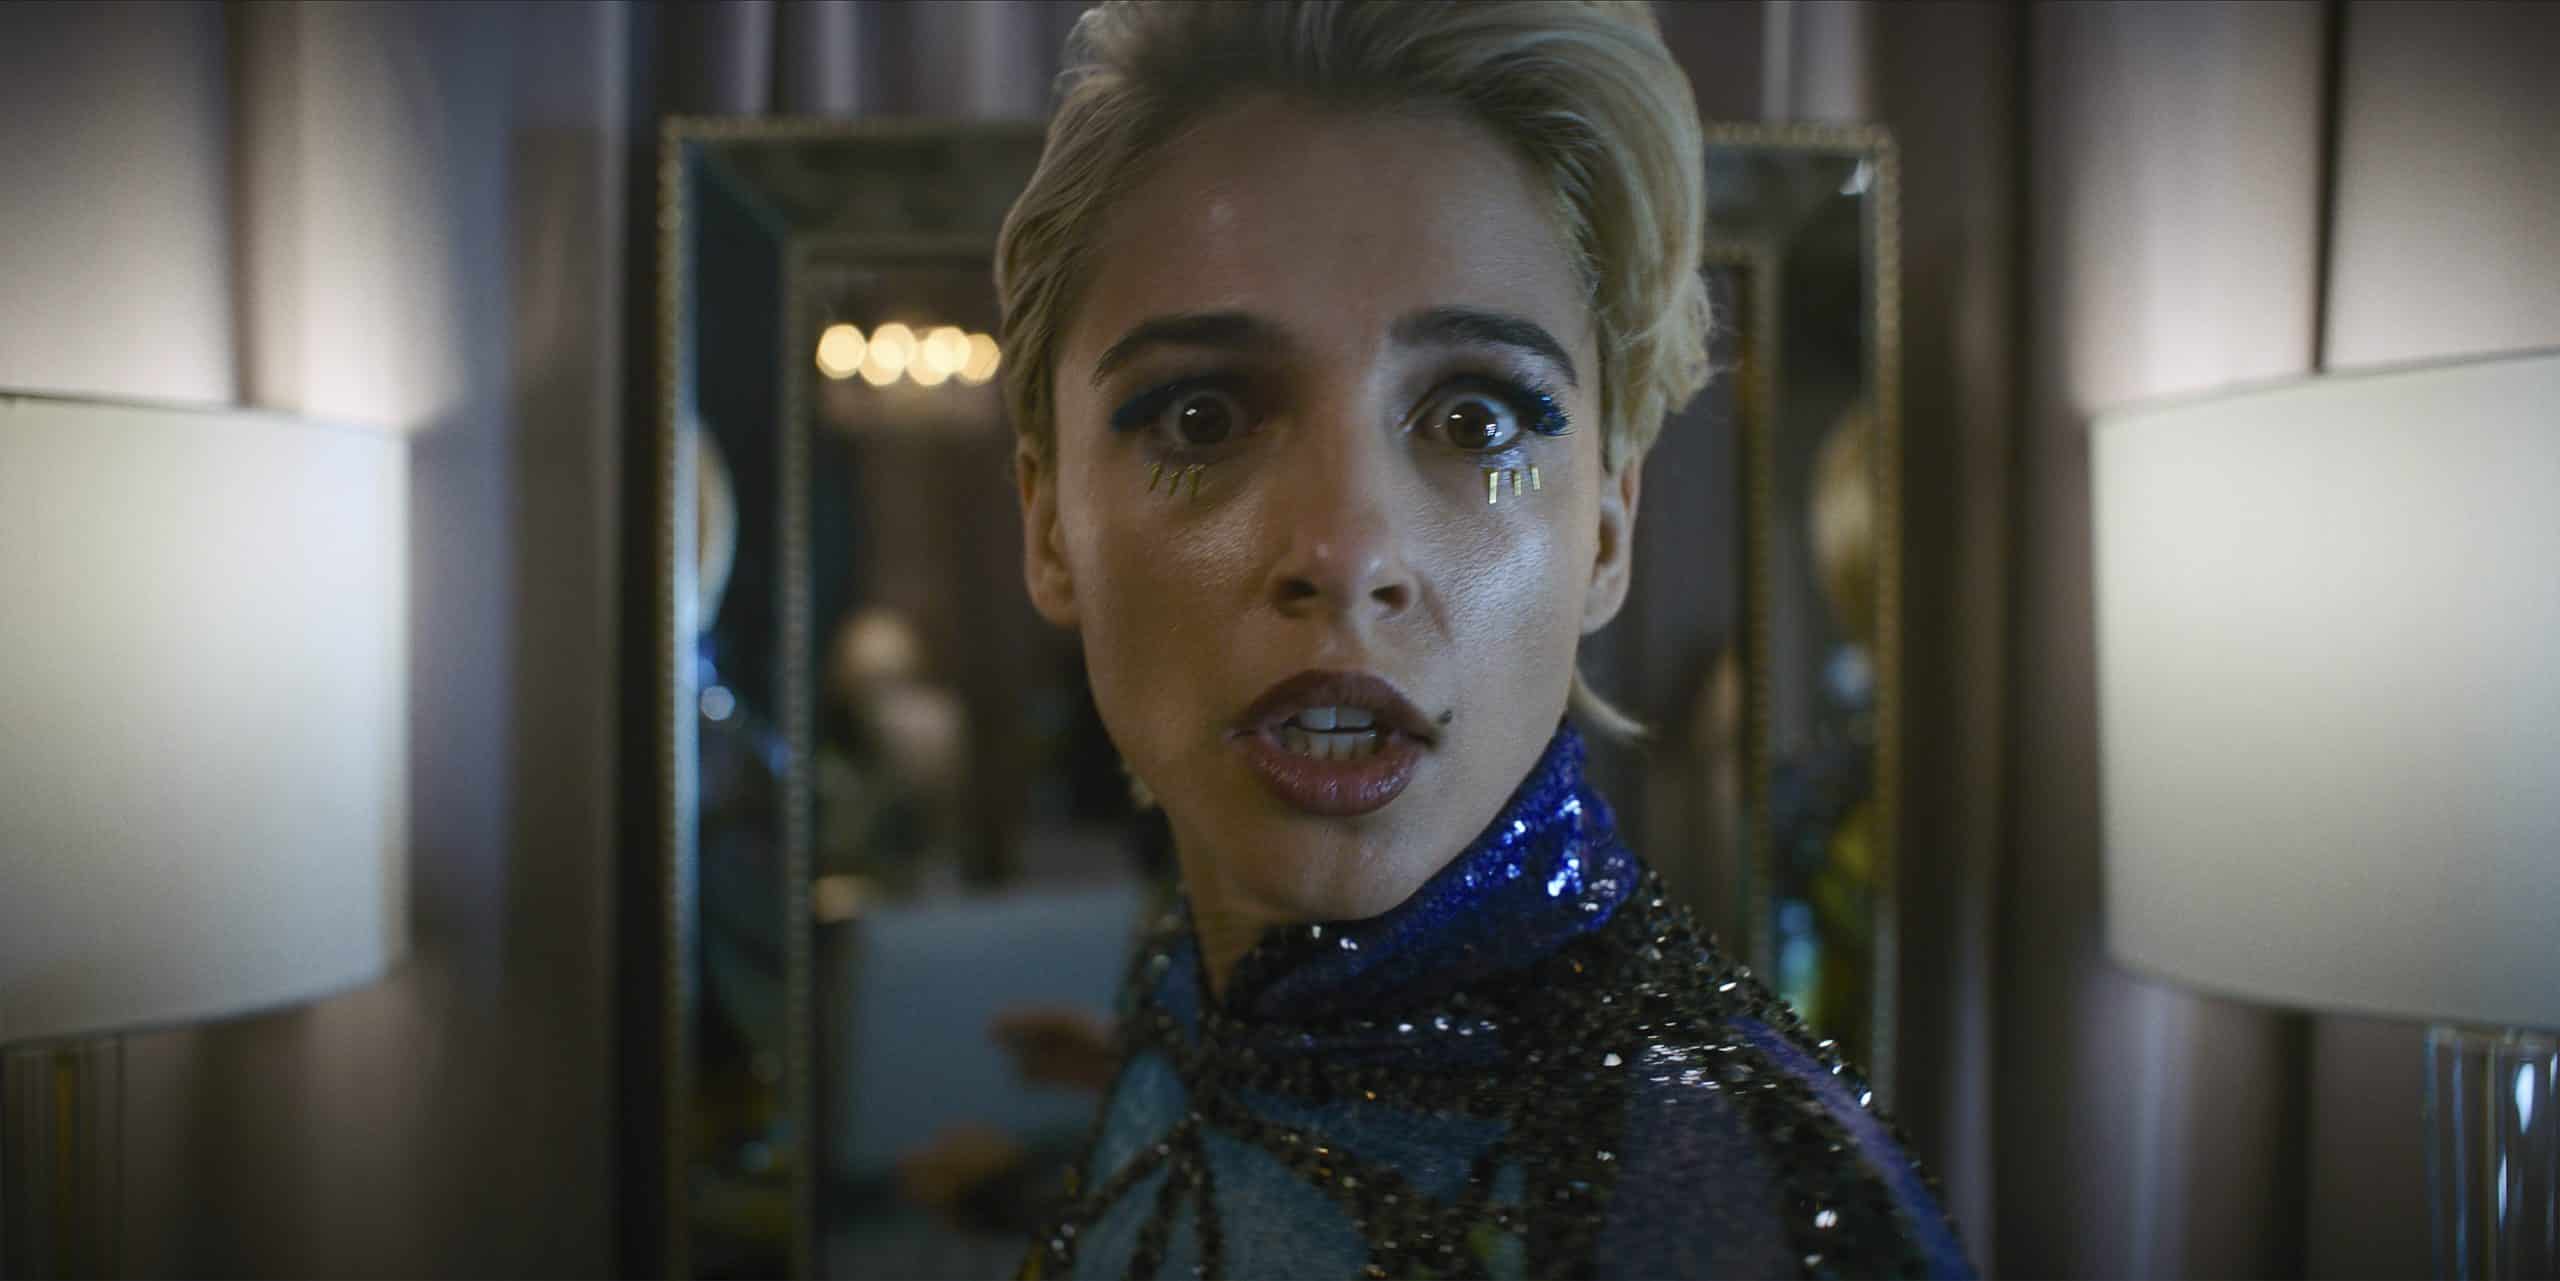 A person with short blonde hair, wearing a sparkly blue and black outfit, is looking directly at the camera with a surprised expression. Teardrop makeup adorns their face, and they are standing in front of a mirror with two lit lamps on either side.